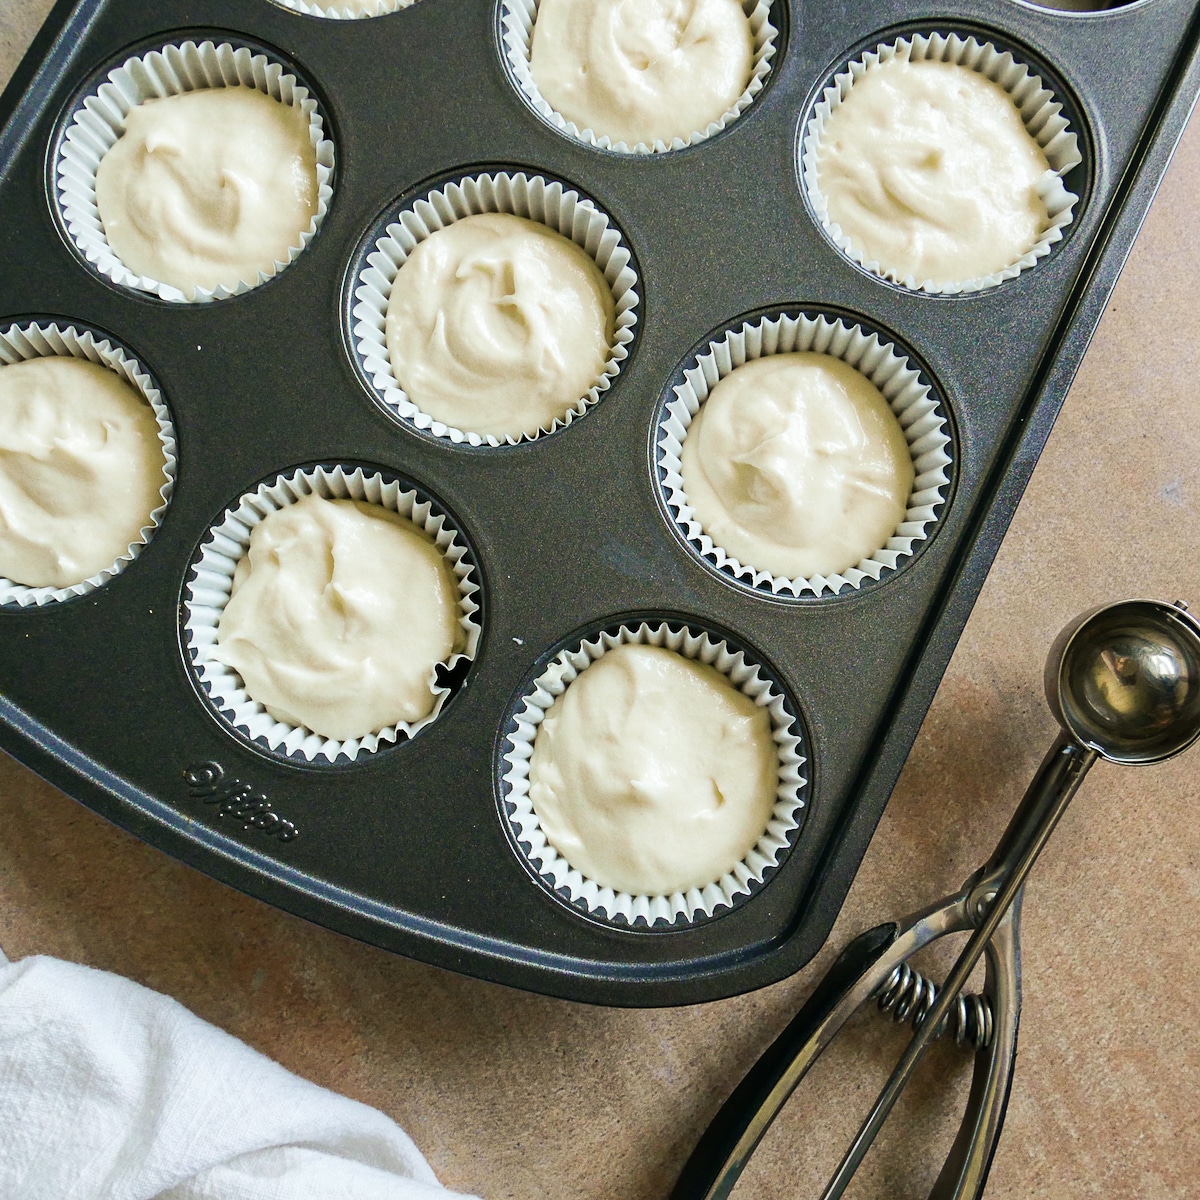 Cupcake batter scooped into lined muffin tin.